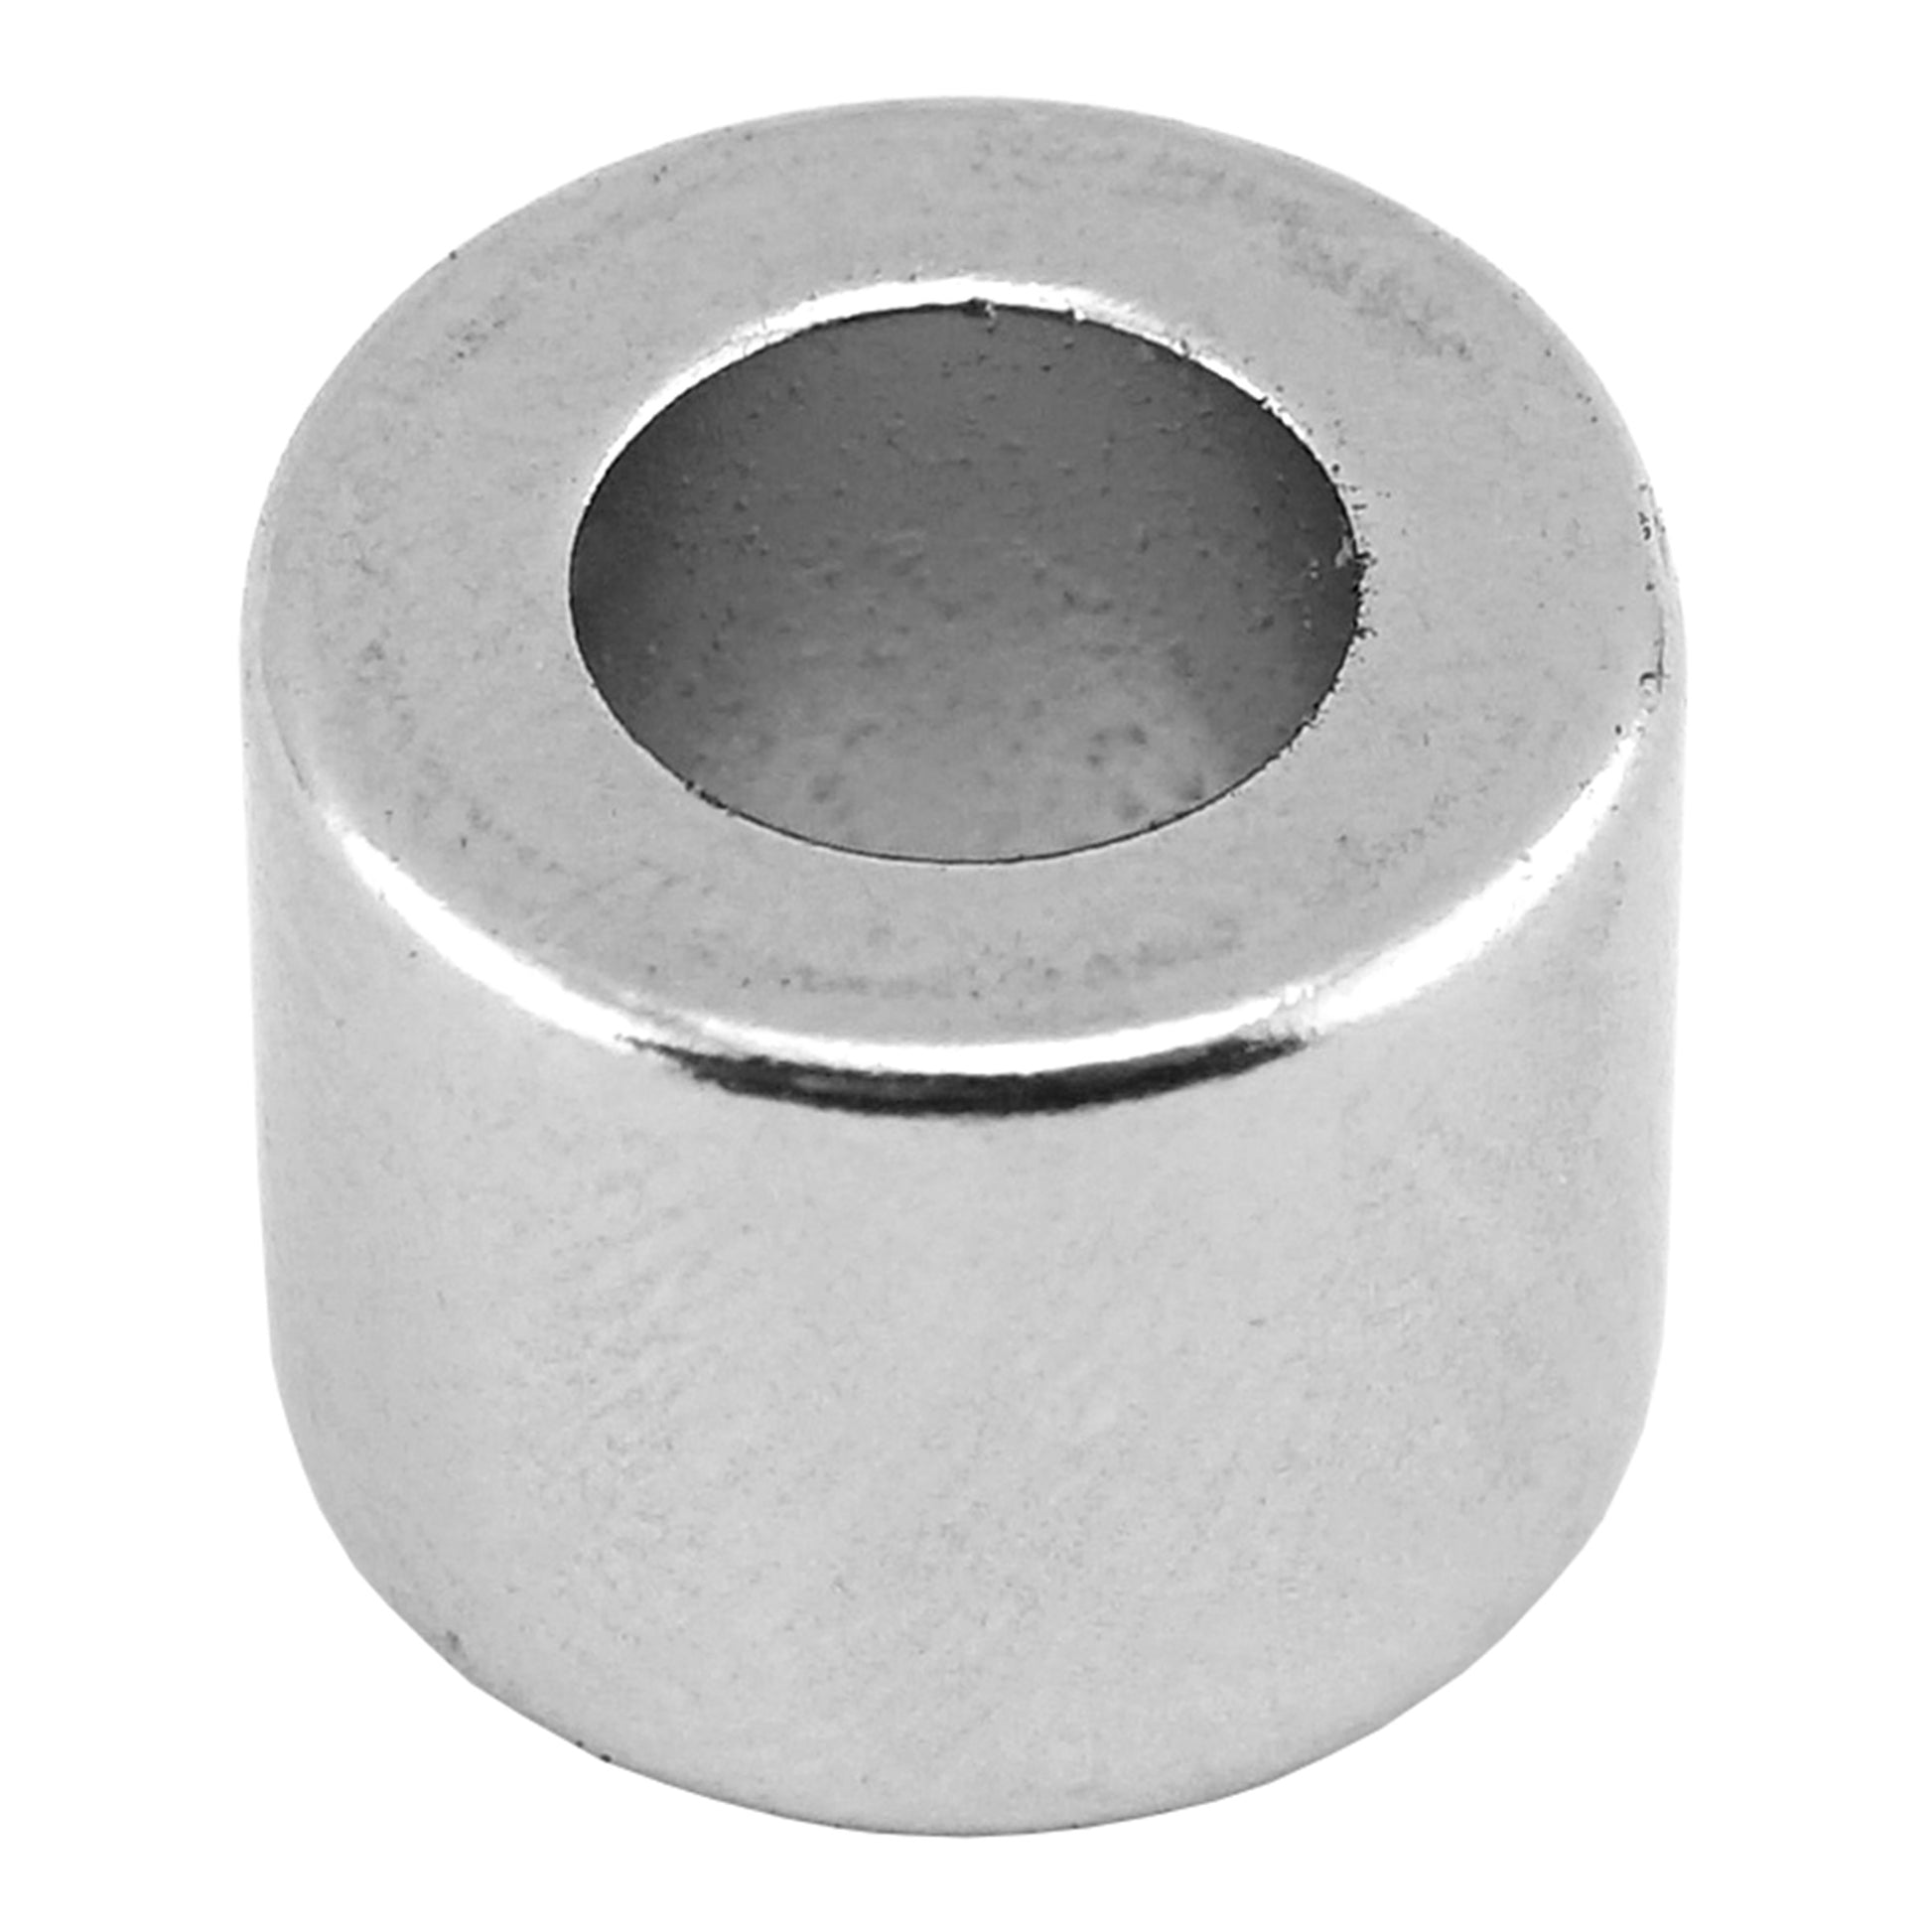 Load image into Gallery viewer, NR004705N Neodymium Ring Magnet - 45 Degree Angle View